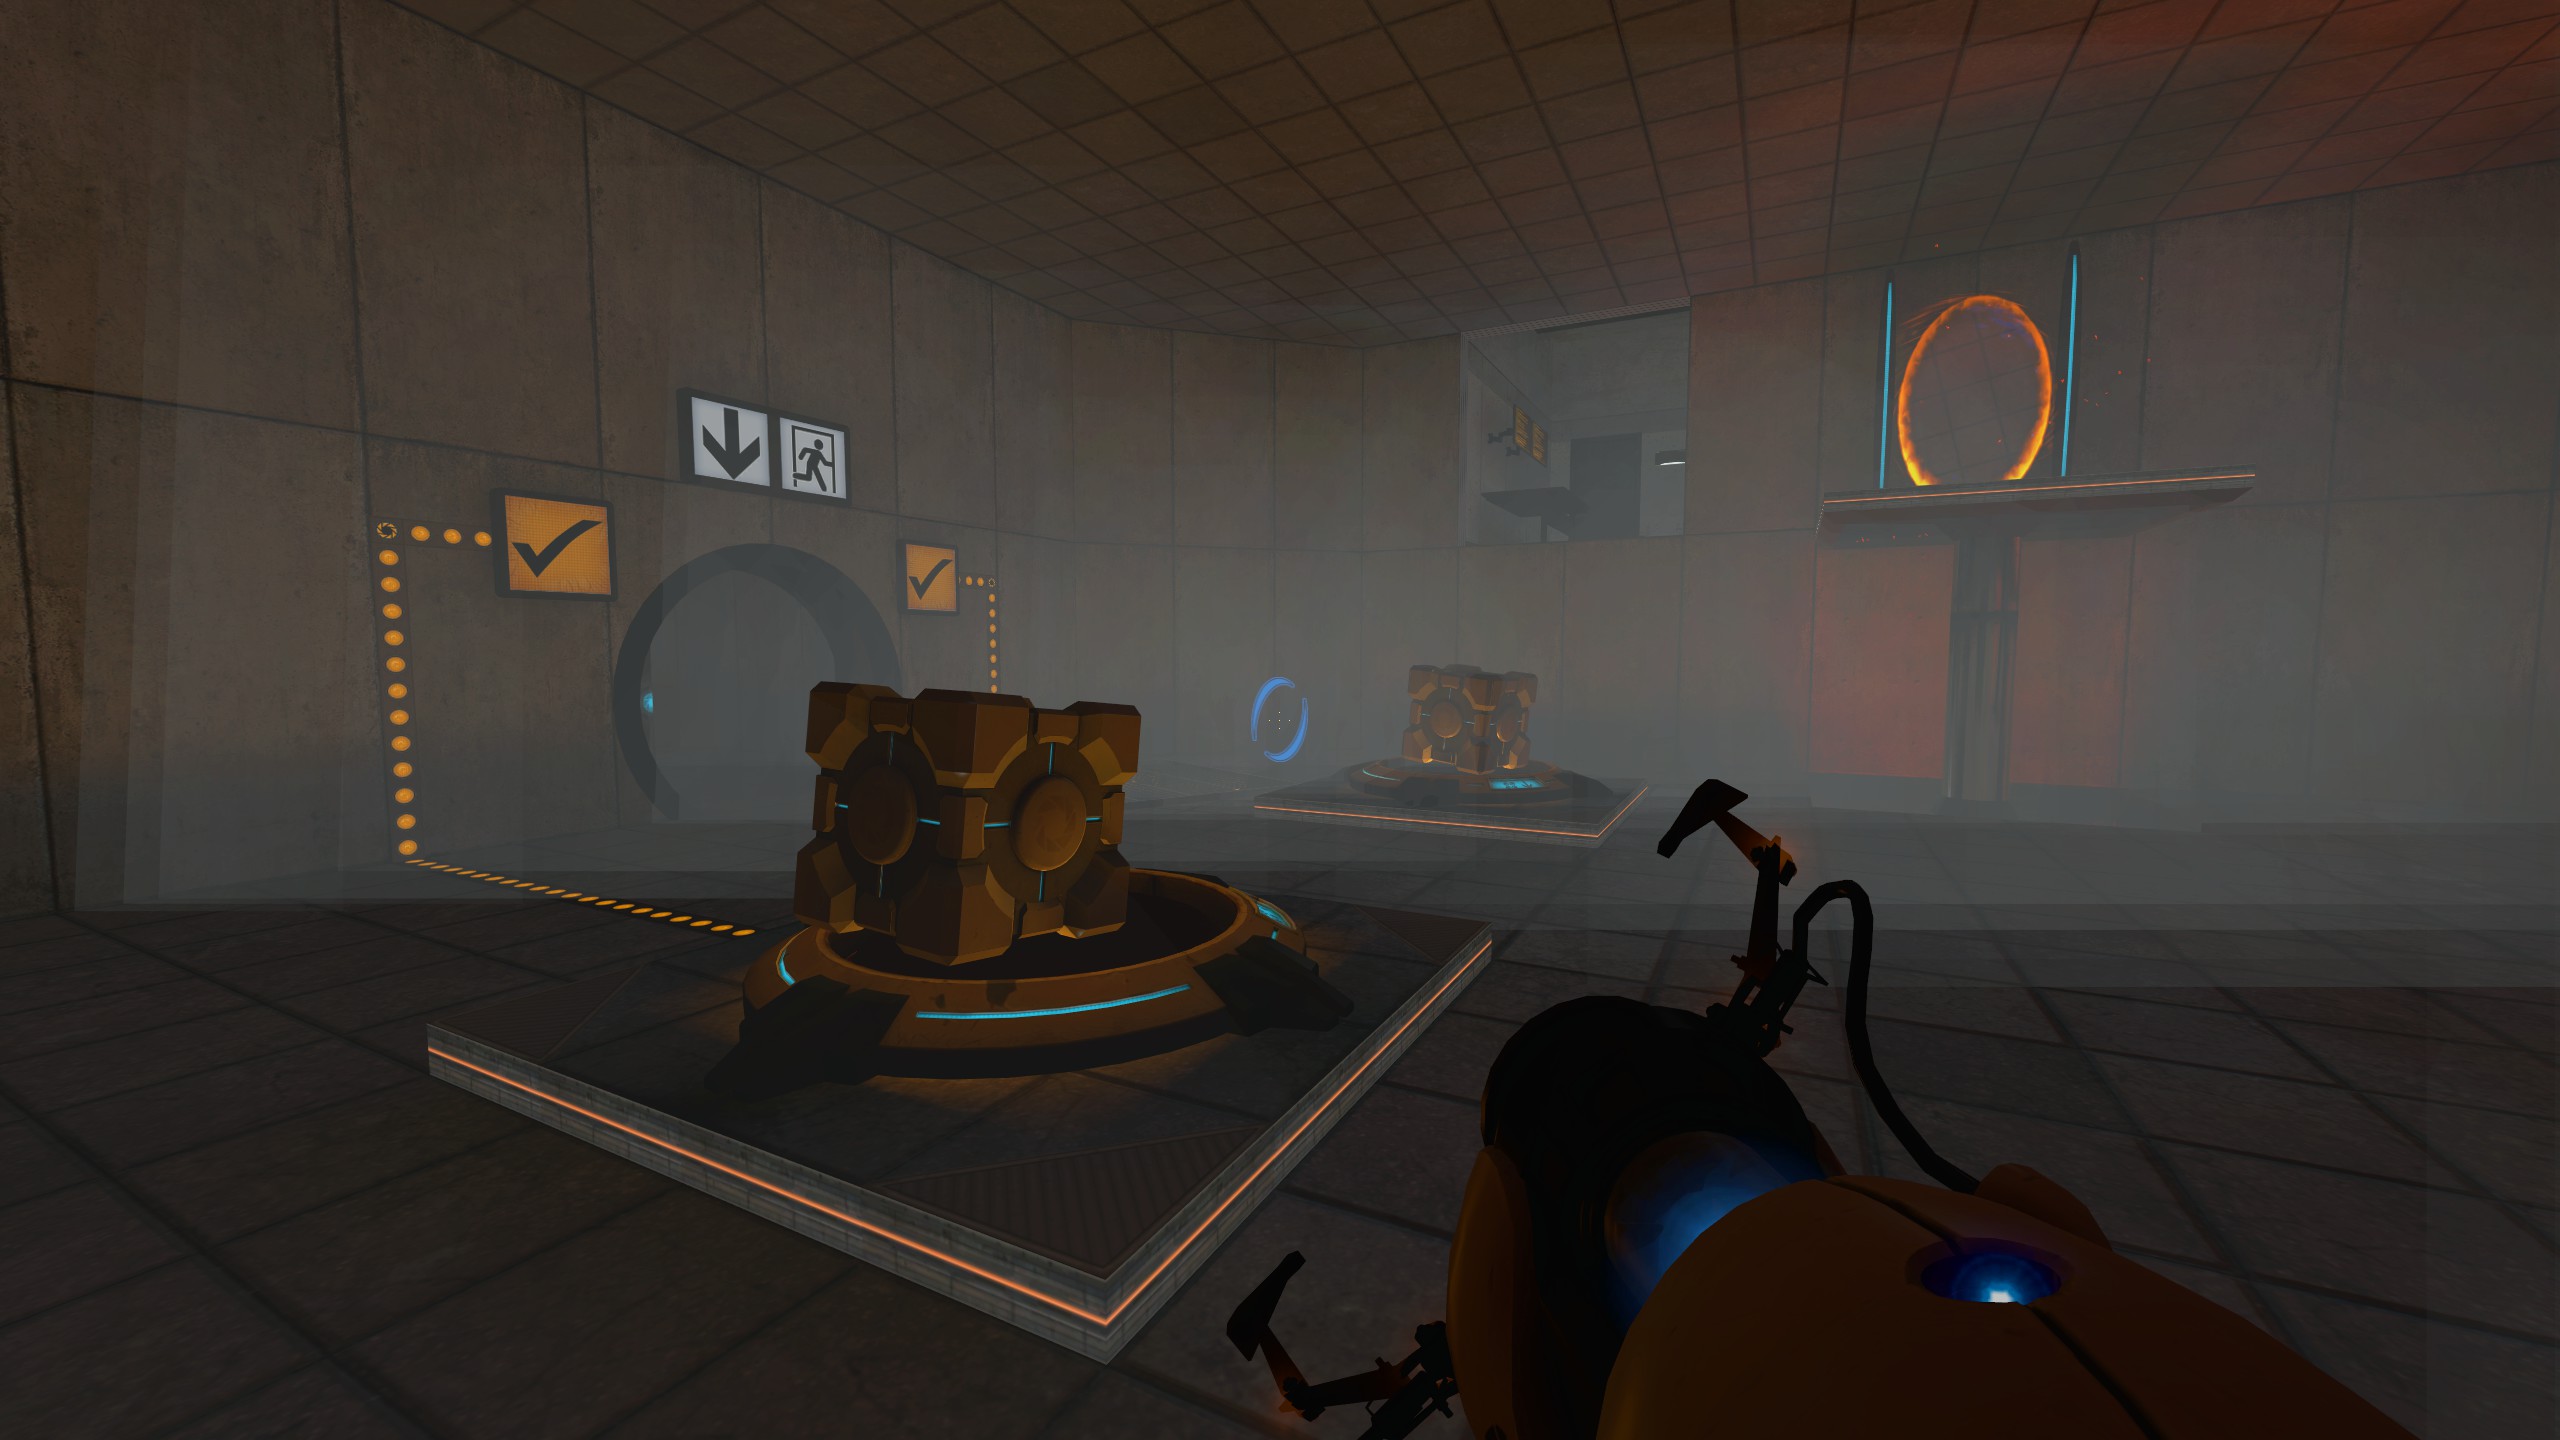  This mod turns the original Portal into a psychological horror 